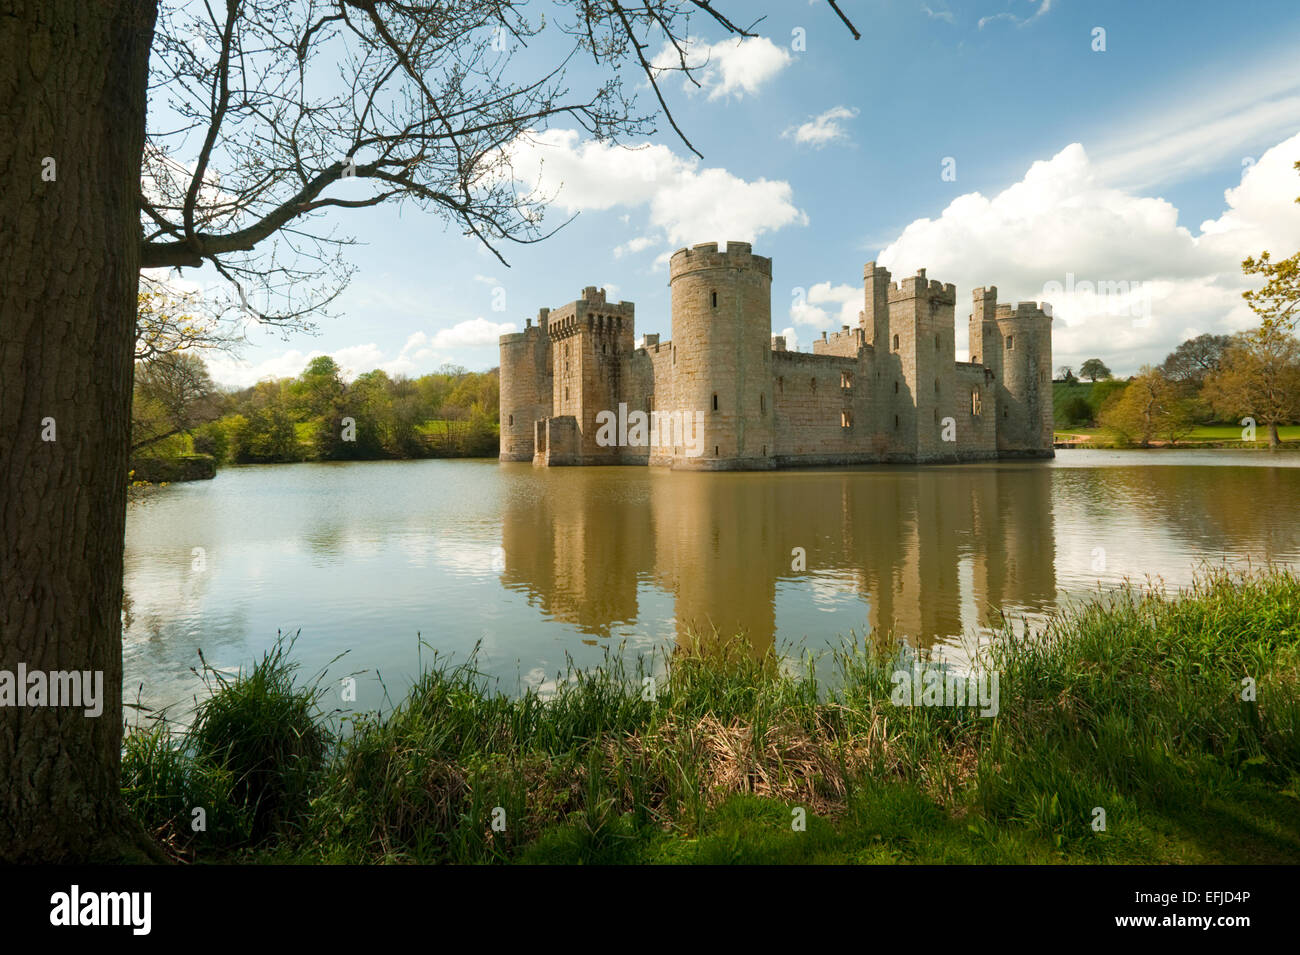 Bodiam castle near Robertsbridge East Sussex, showing the Moat and towers. Stock Photo